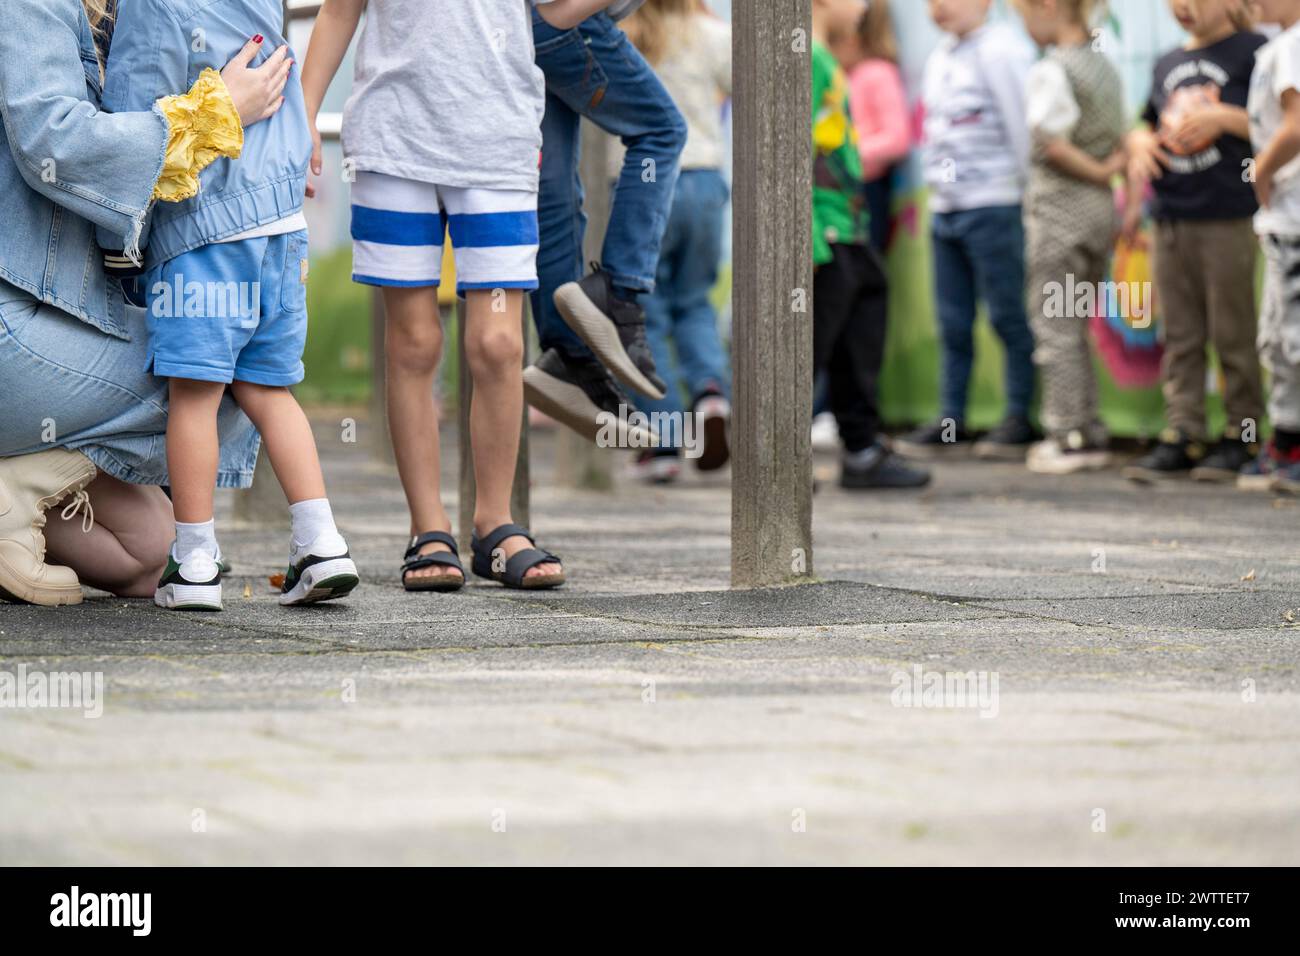 A line of diverse children captured at ground level in a park, with an adult crouching to comfort a little one. Stock Photo